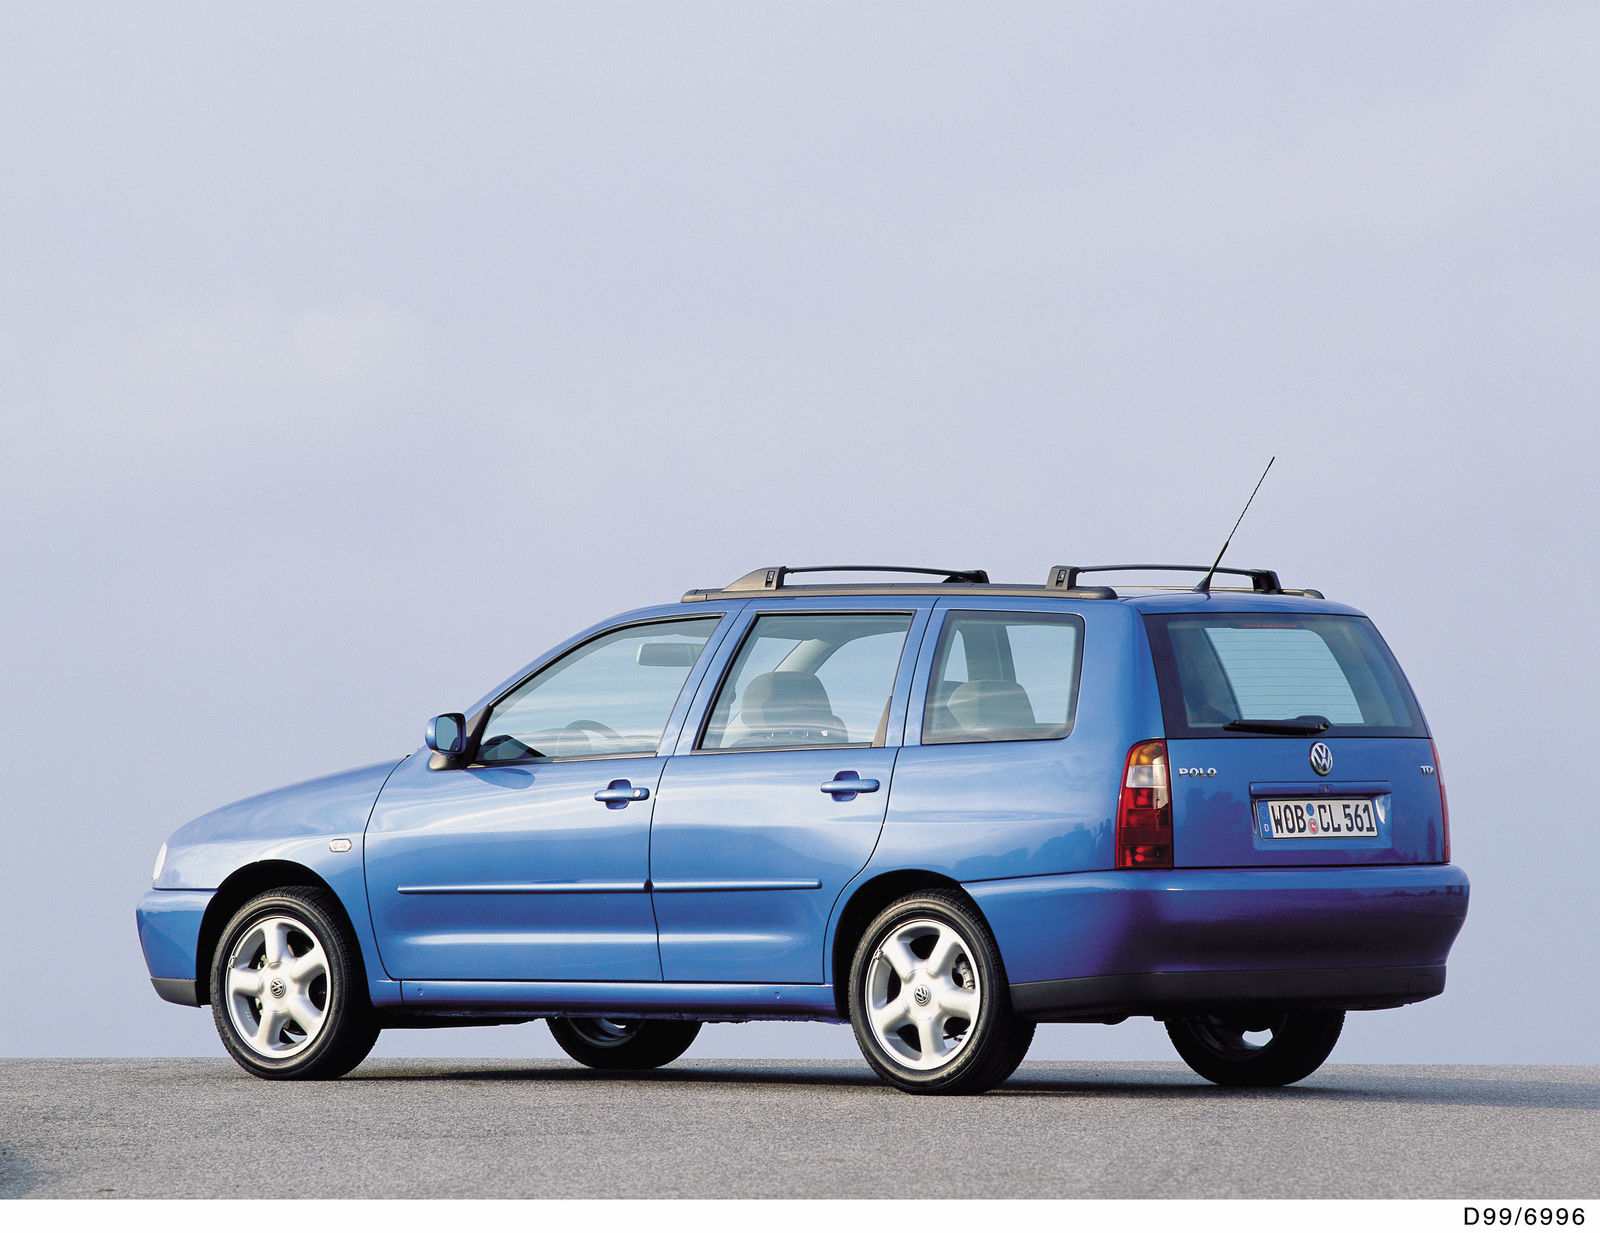 Product: Polo Variant (1999)